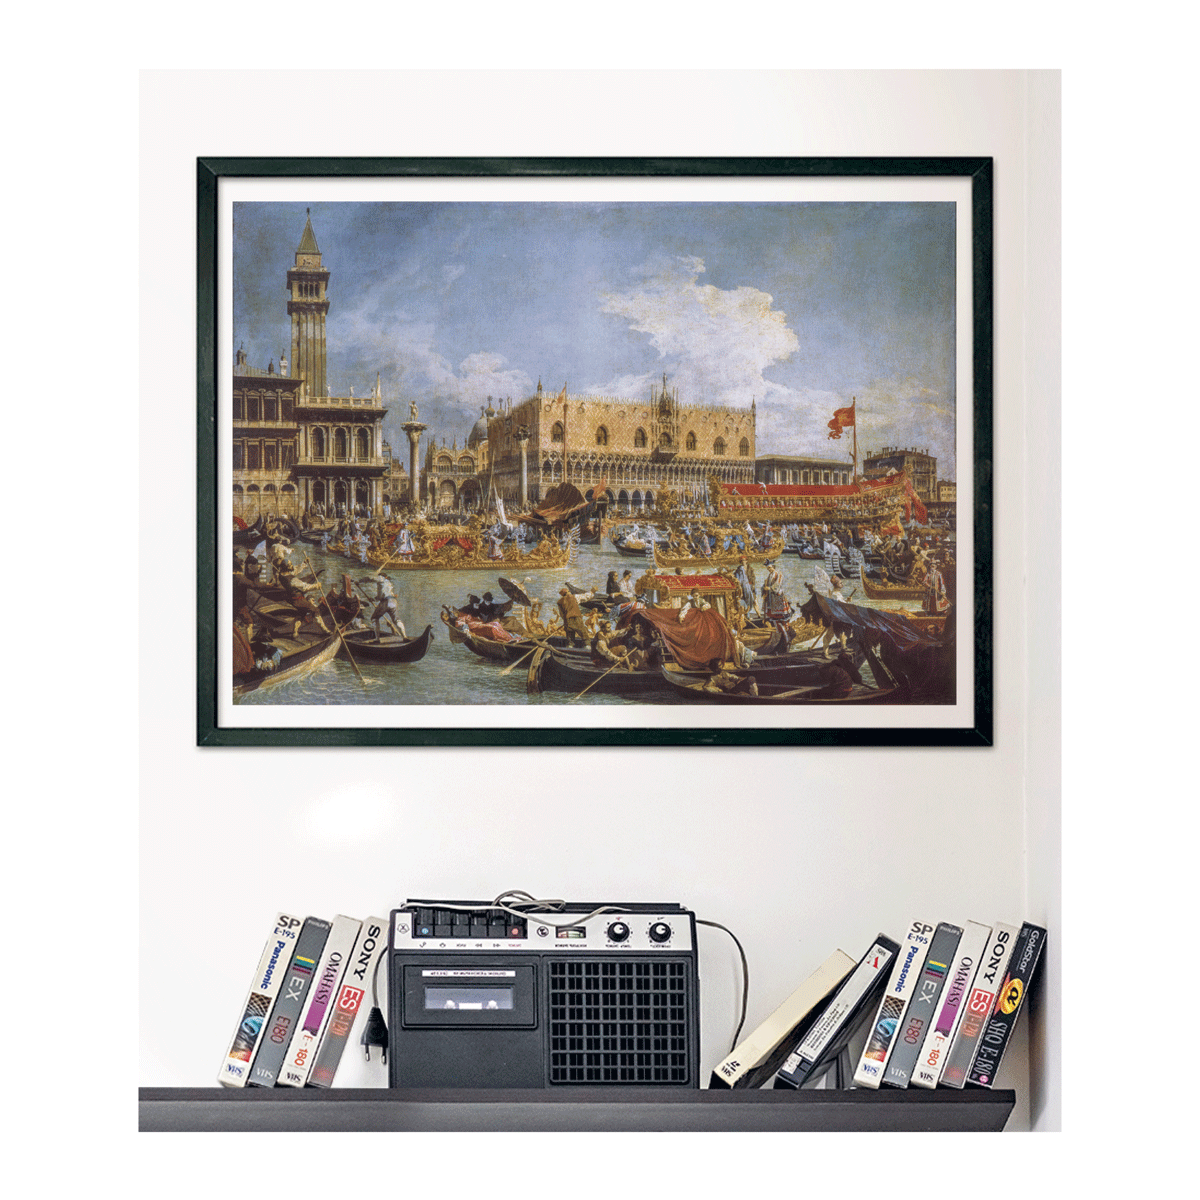 Clementoni puzzle museum collection - canaletto, "the return of the bucentaur at the molo on ascension day" - 1000 pezzi, puzzle adulti - CLEMENTONI